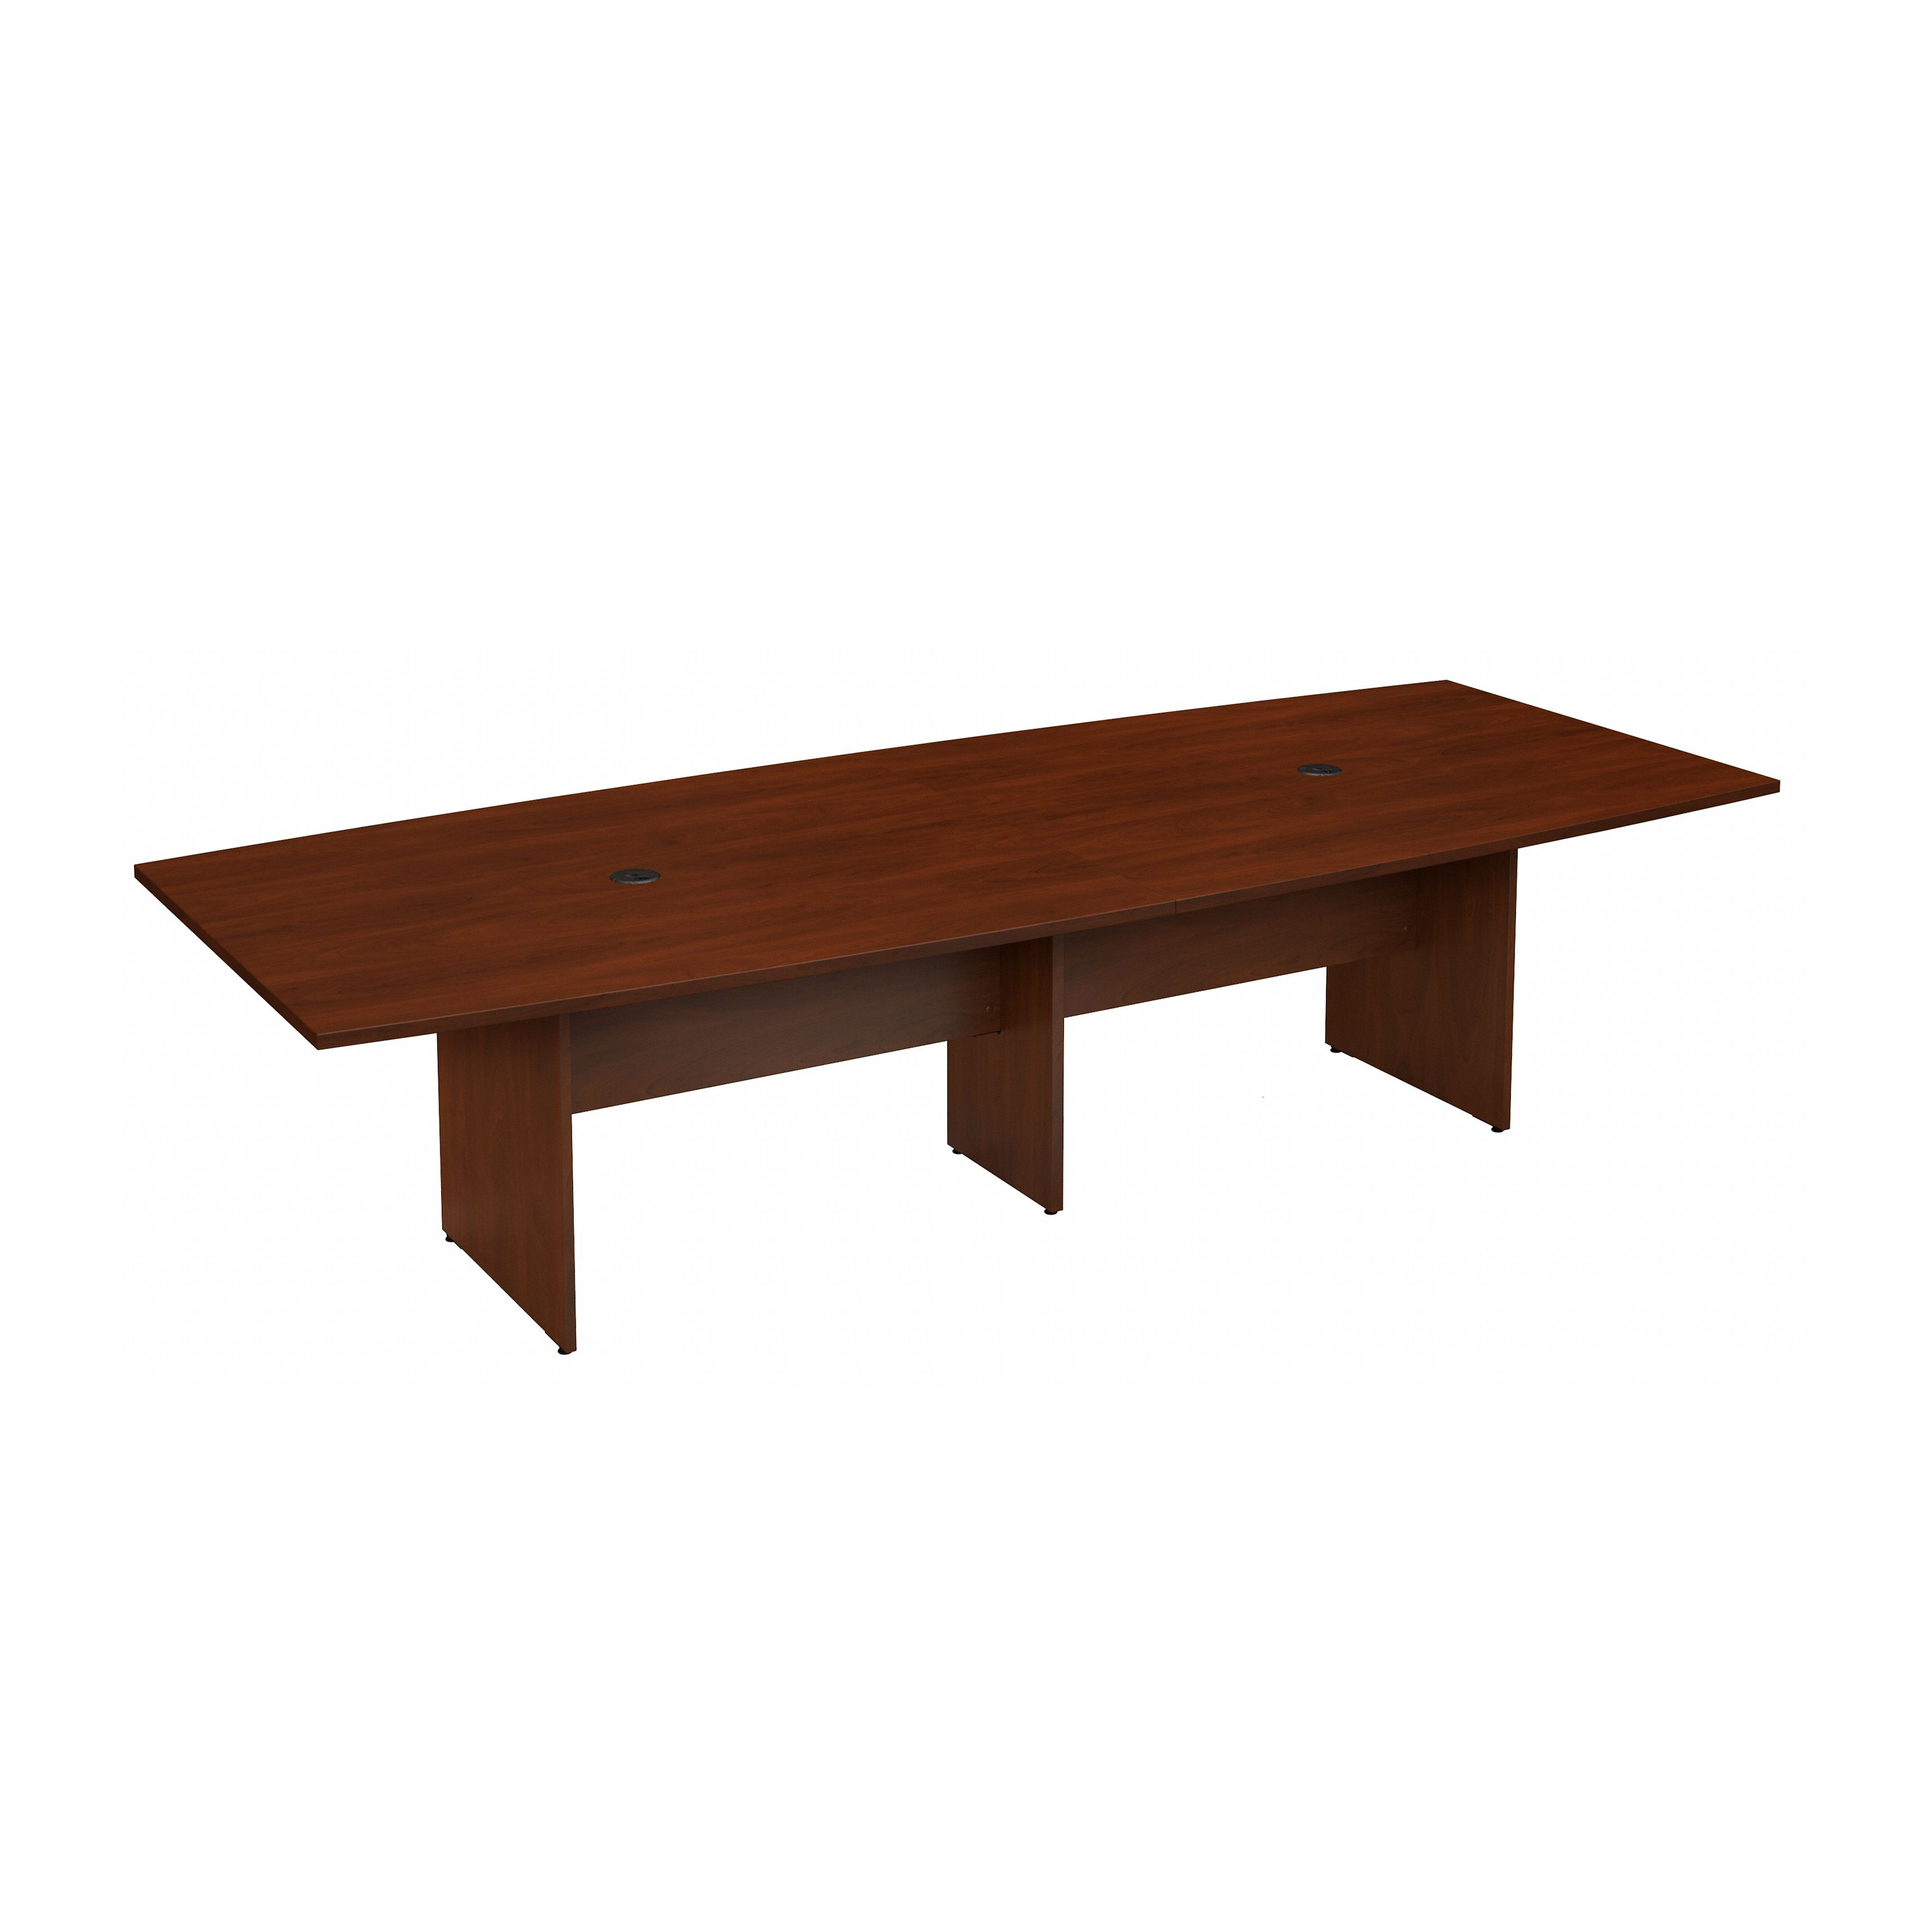 Shop Bush Business Furniture 120W x 48D Boat Shaped Conference Table with Wood Base 02 99TB12048HCK #color_hansen cherry